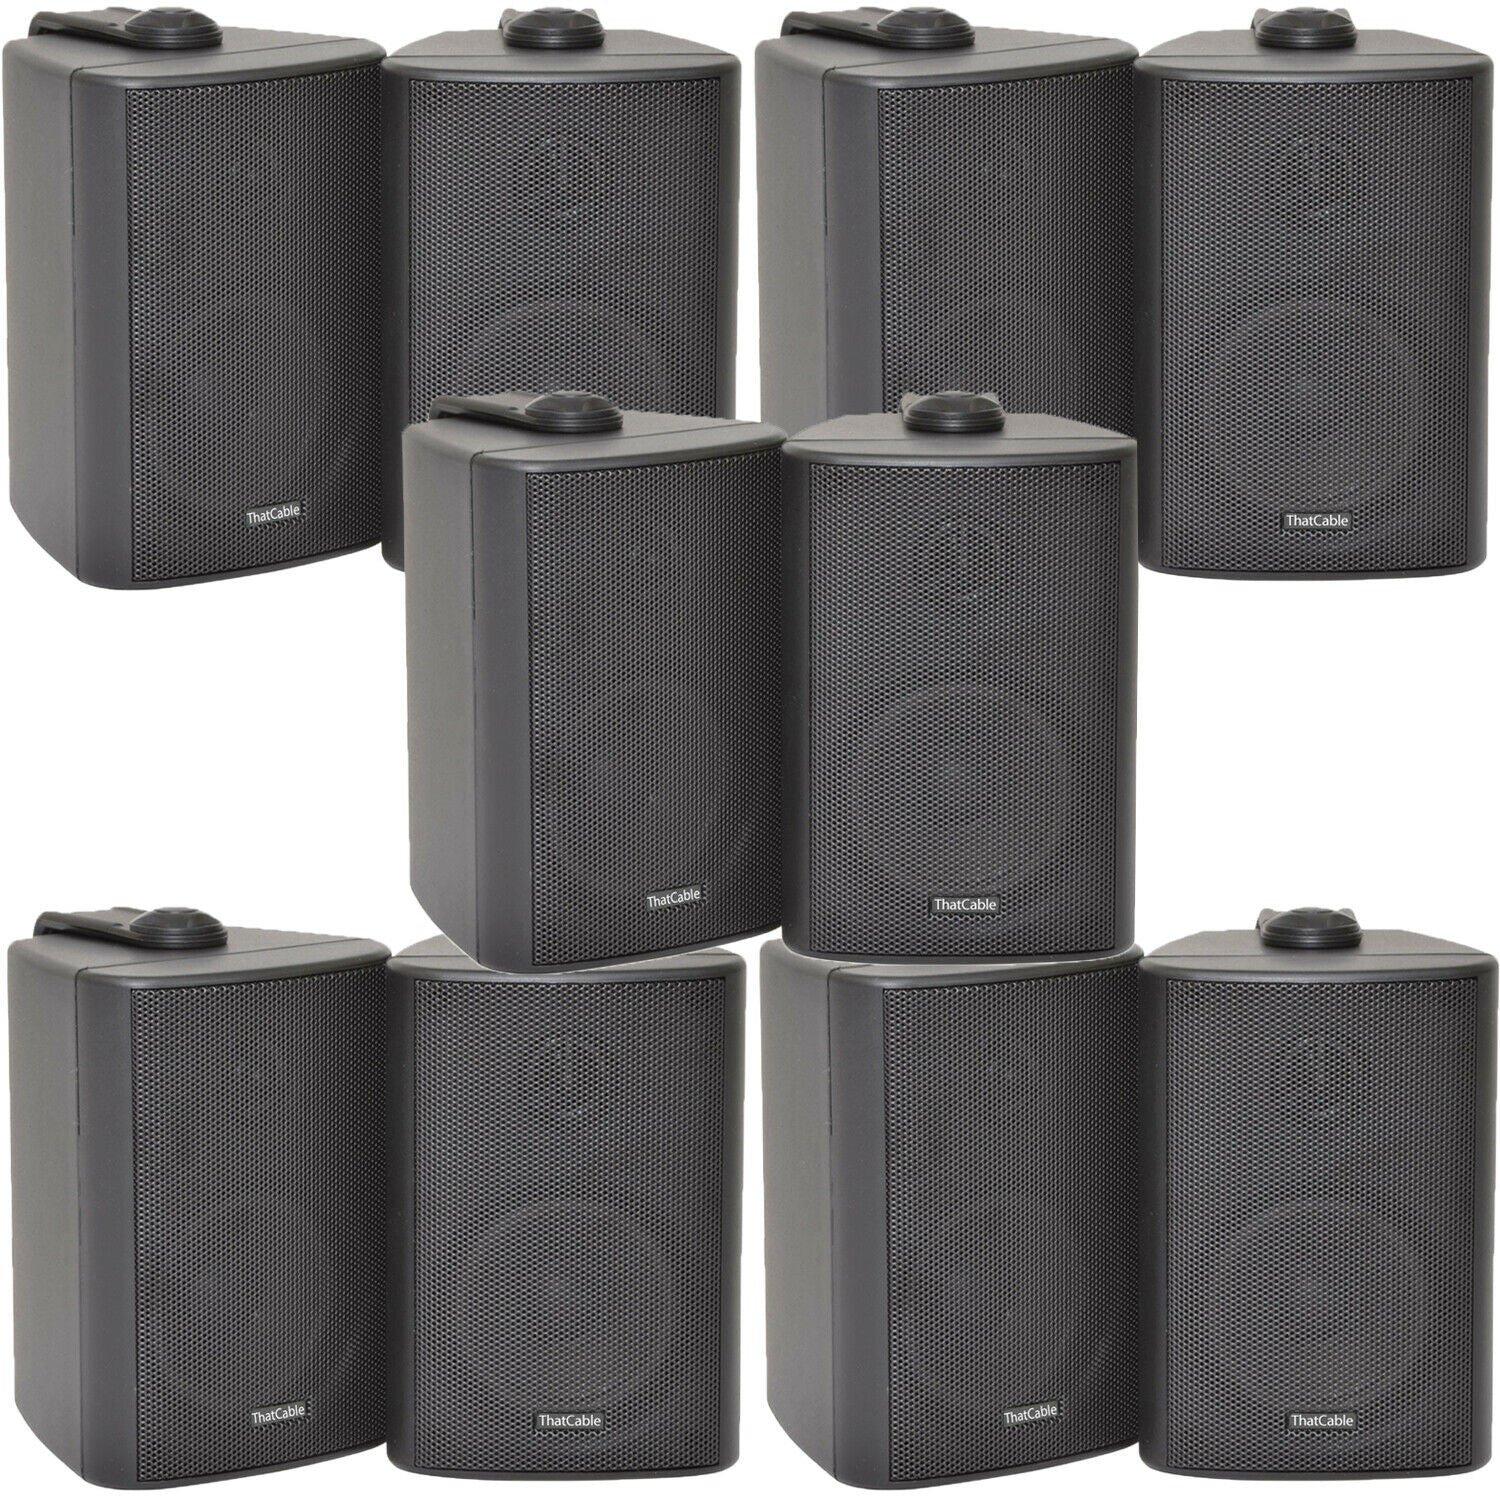 10x 60W 2 Way Black Wall Mounted Stereo Speakers 3